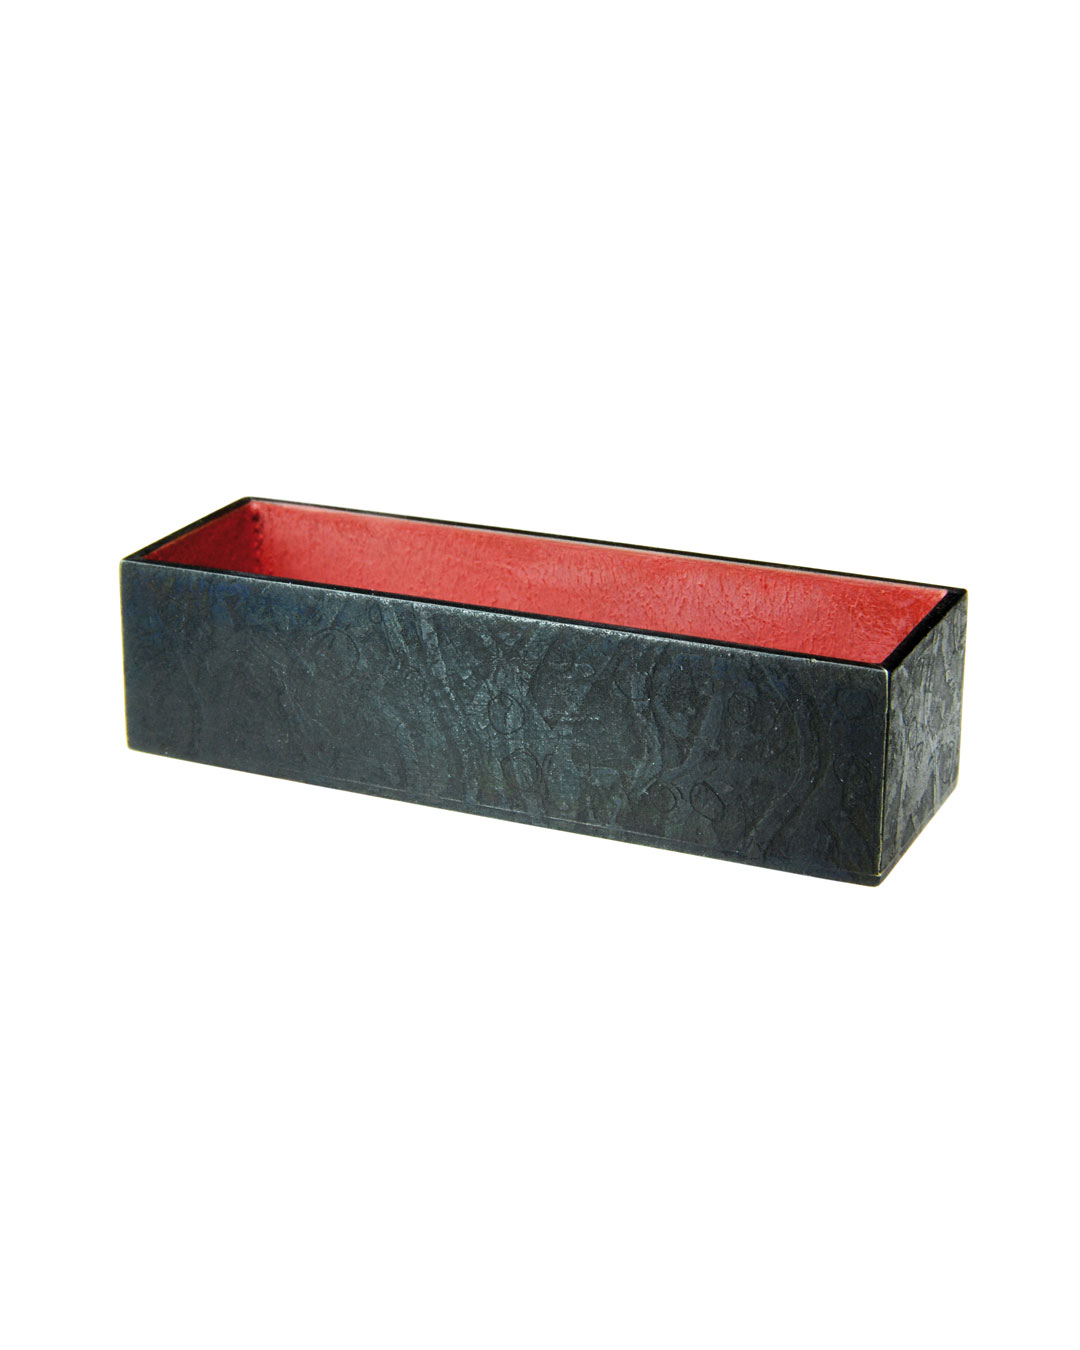 Tore Svensson, Box, 2009, brooch; etched and painted steel, 60 x 20 x 15 mm, €510